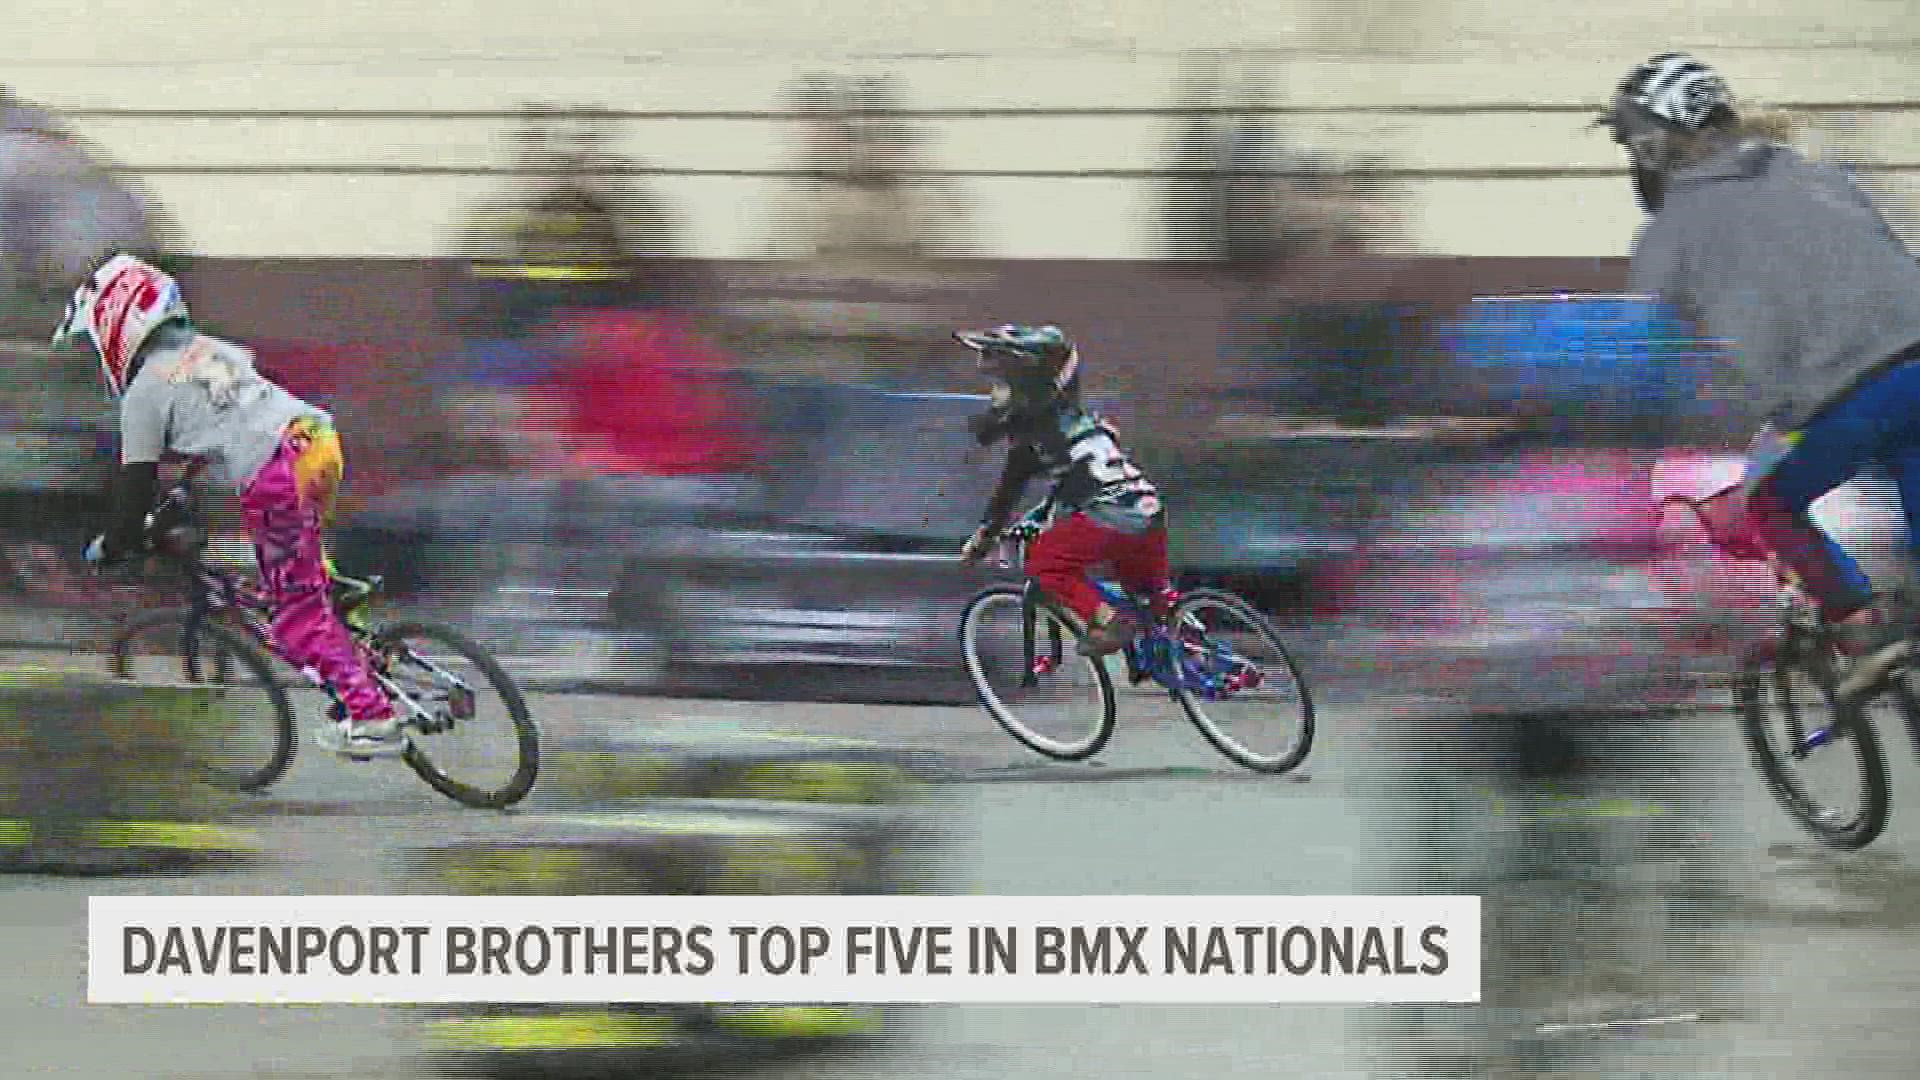 Knox and Deacon Reaves placing in the USA BMX Grand Nationals in Tulsa, Okla.